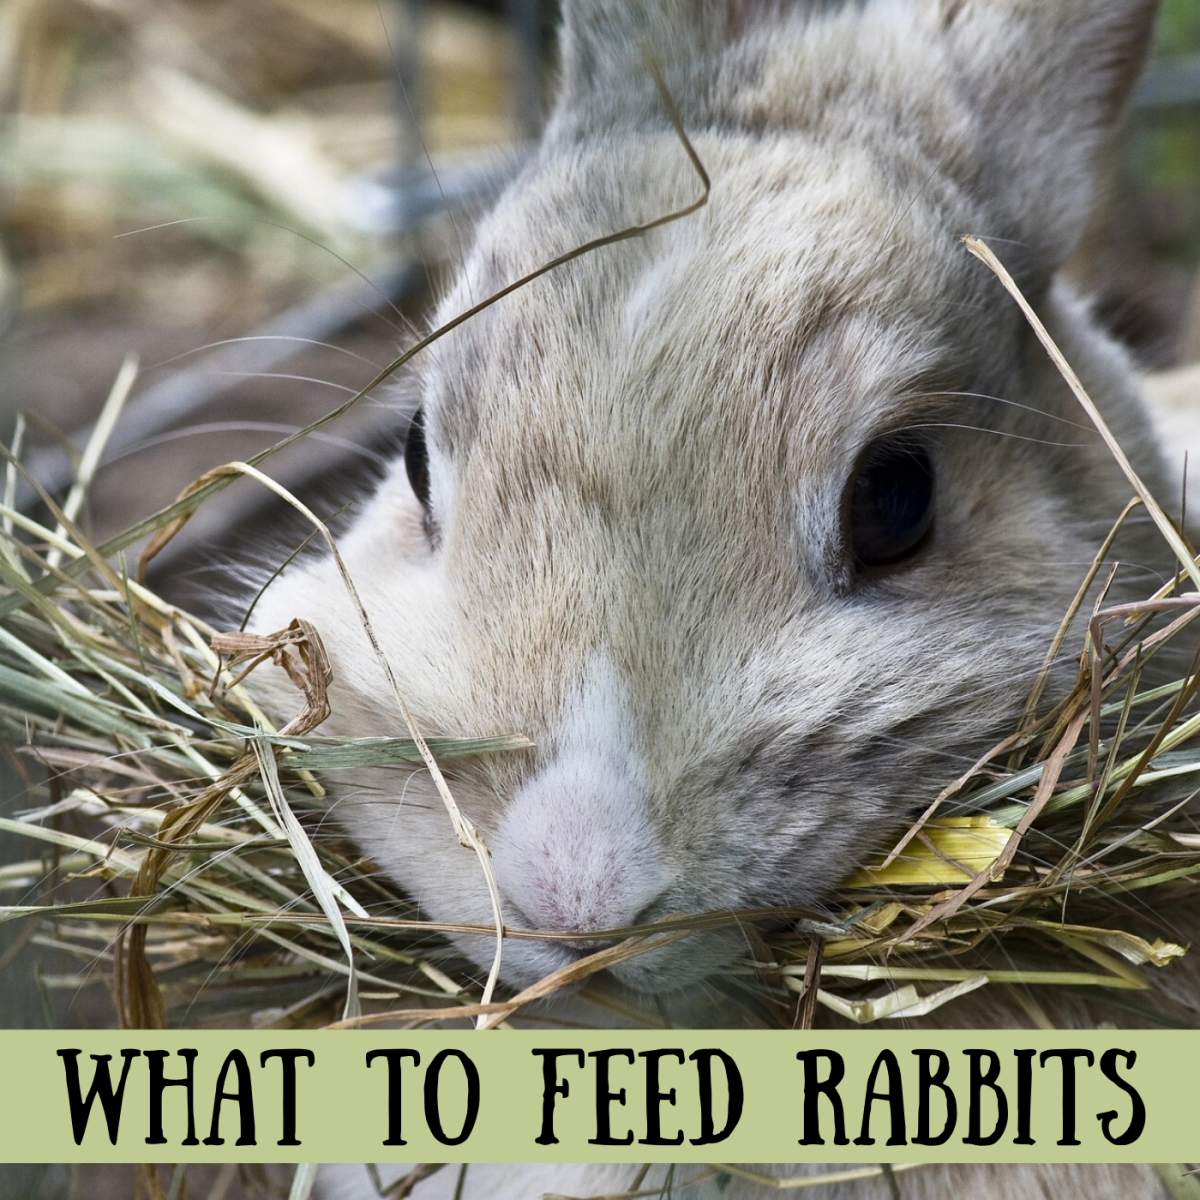 Do you know which foods are safe for your bunny?